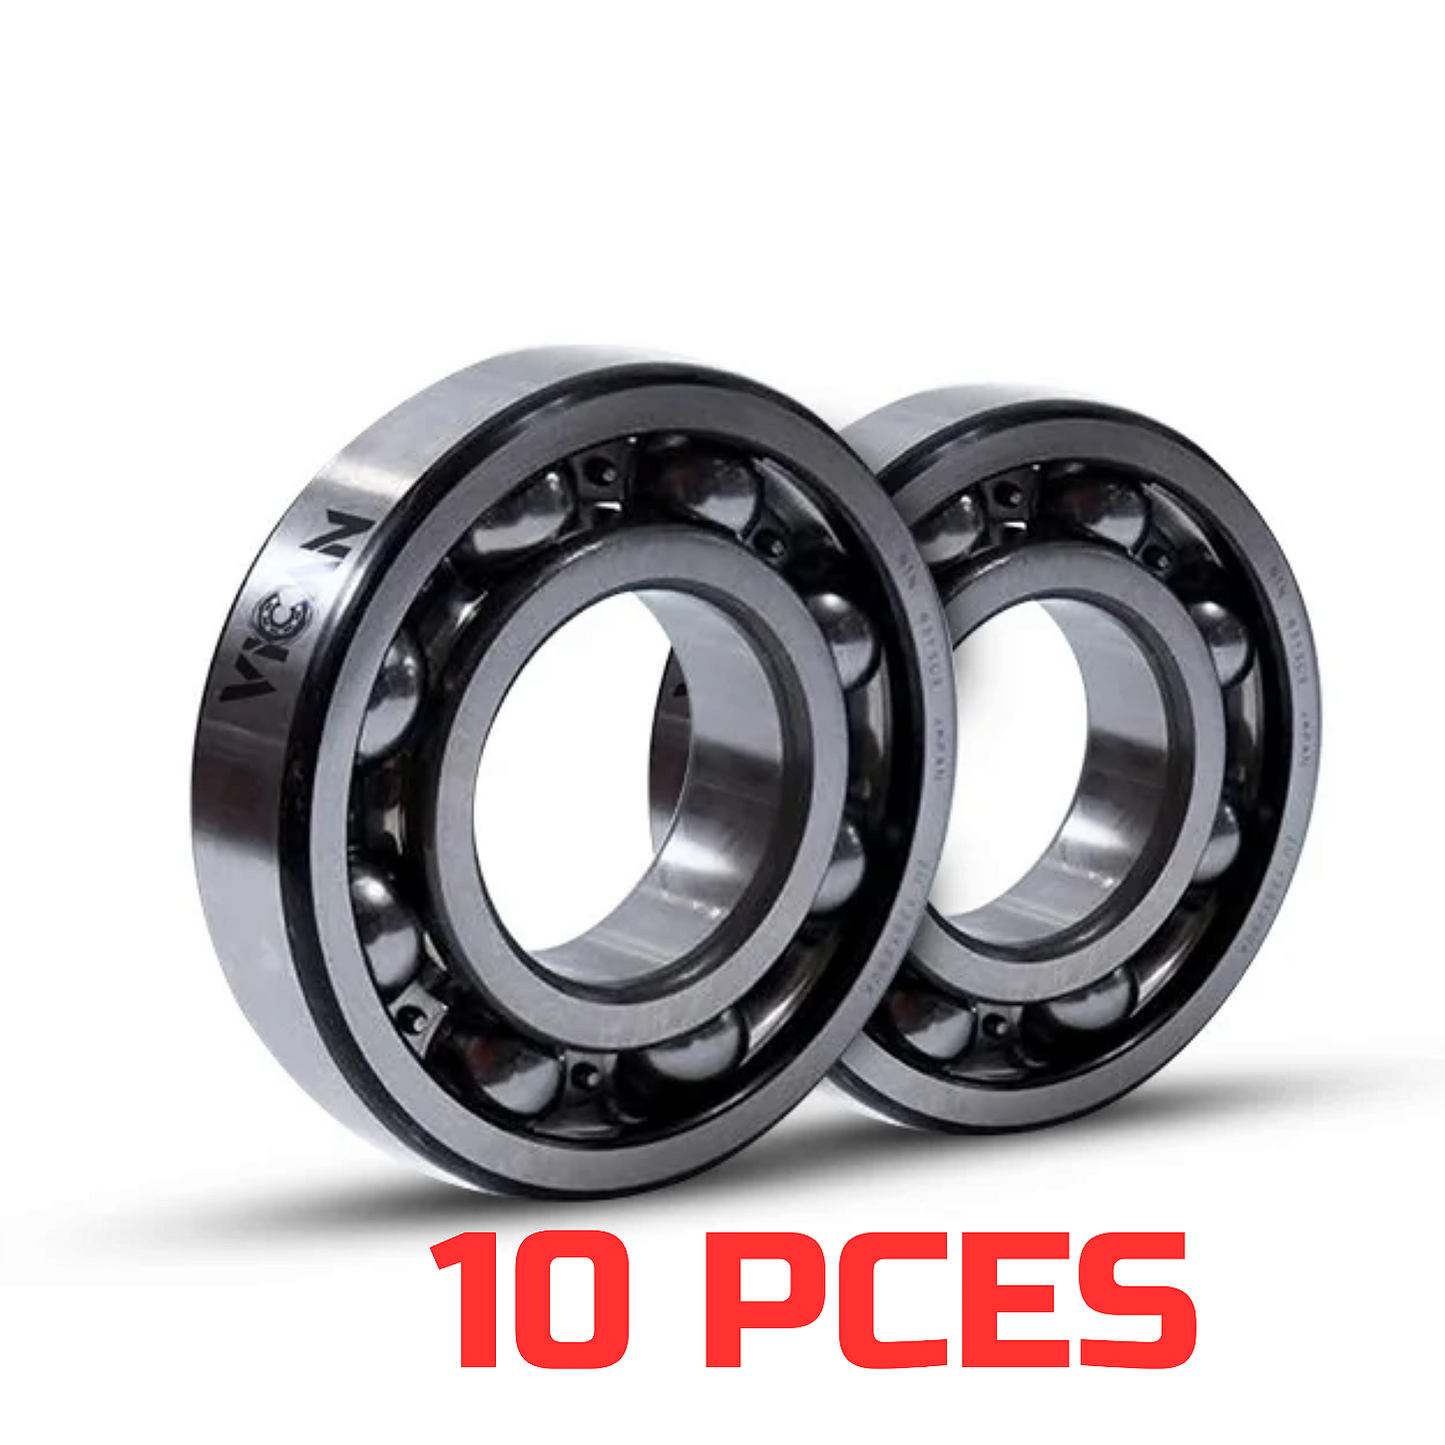 STAINLESS STEEL BEARING 10 PCES MULTIPACK, 3x8x4 MILLIMETERS VICAN BEARING